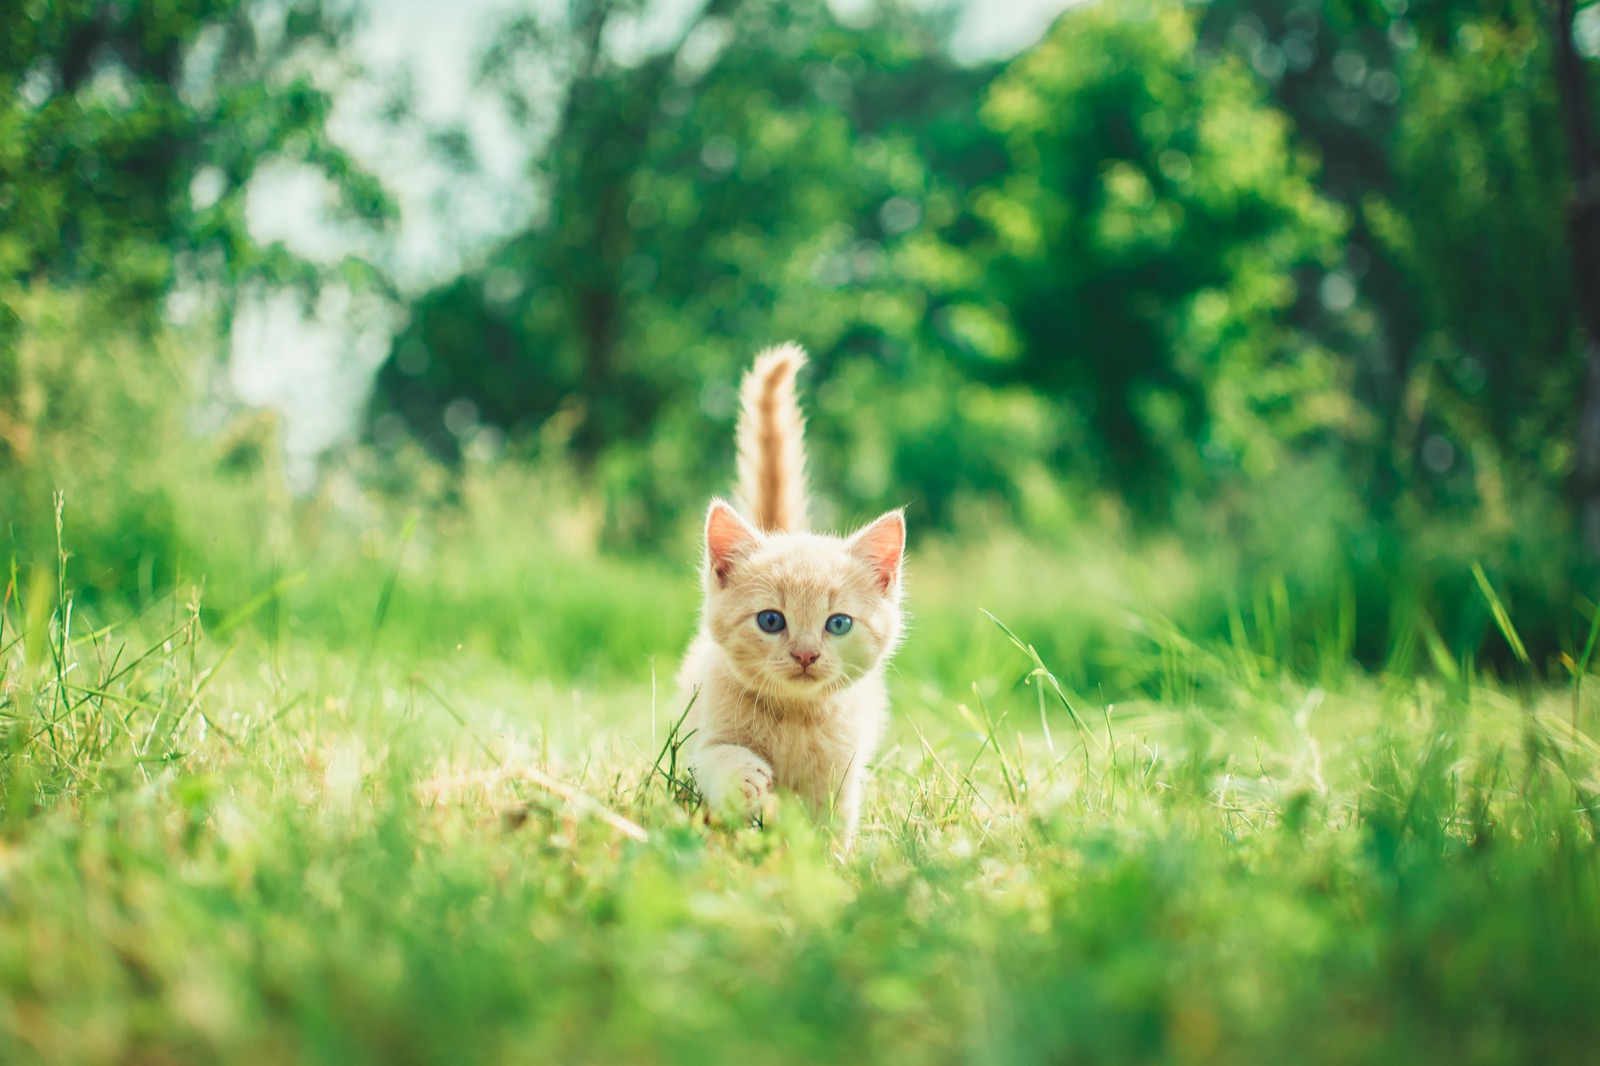 Can You Pass This General Knowledge Quiz While Being Distracted by Adorable Kittens? Cute cat kitten 4